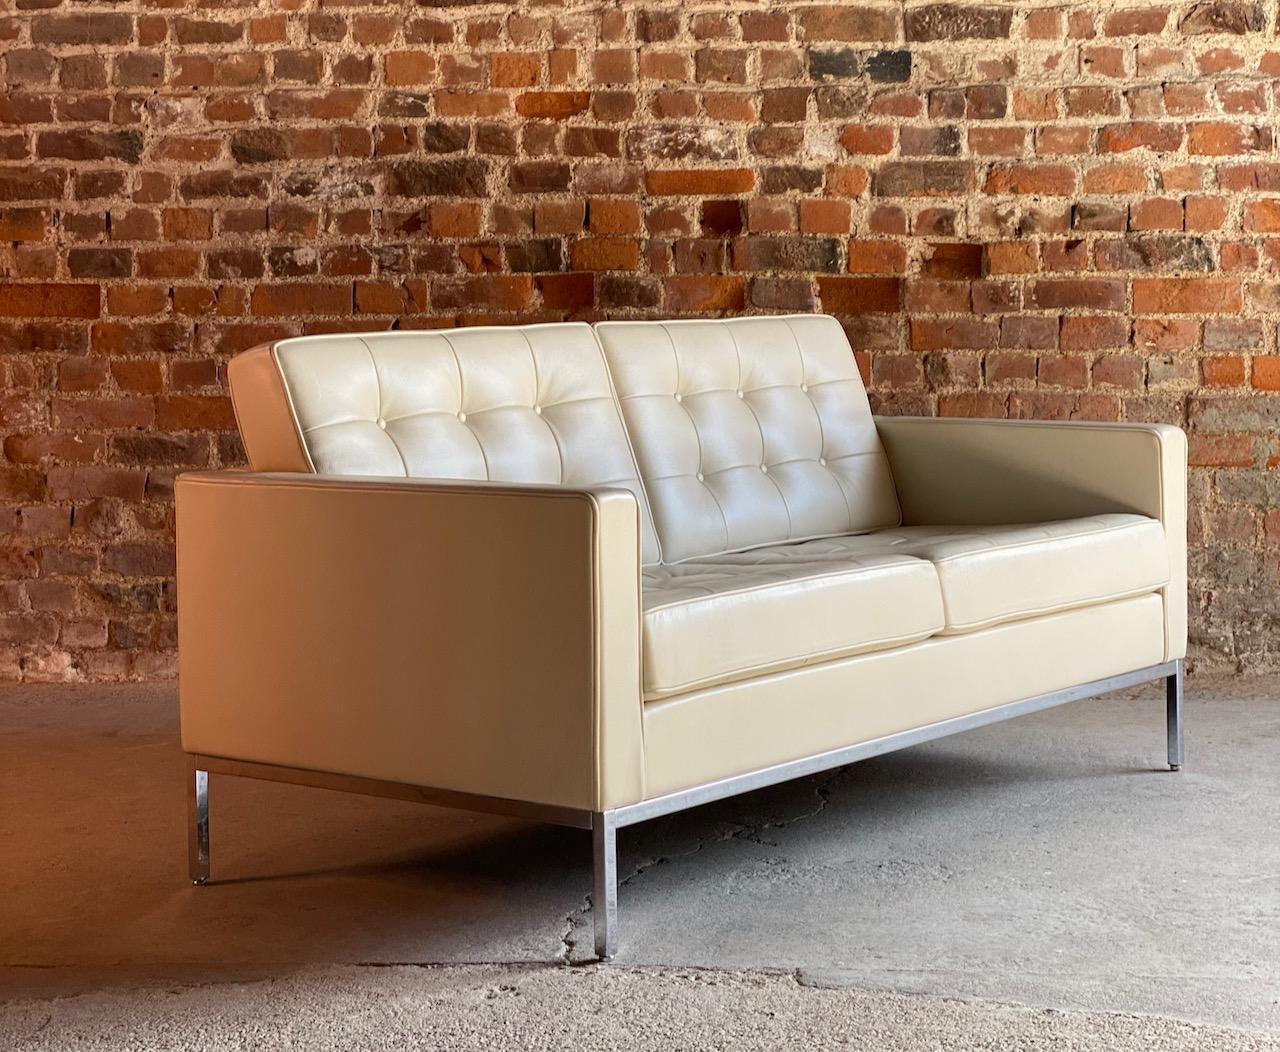 Florence Knoll leather sofa by Knoll Studio

Sublime quality Florence Knoll for Knoll Studio Model 1205S2C leather two-seat sofa, the chrome frame supporting the finest cream Spinneybeck HT513 leather button upholstered seats, this is an